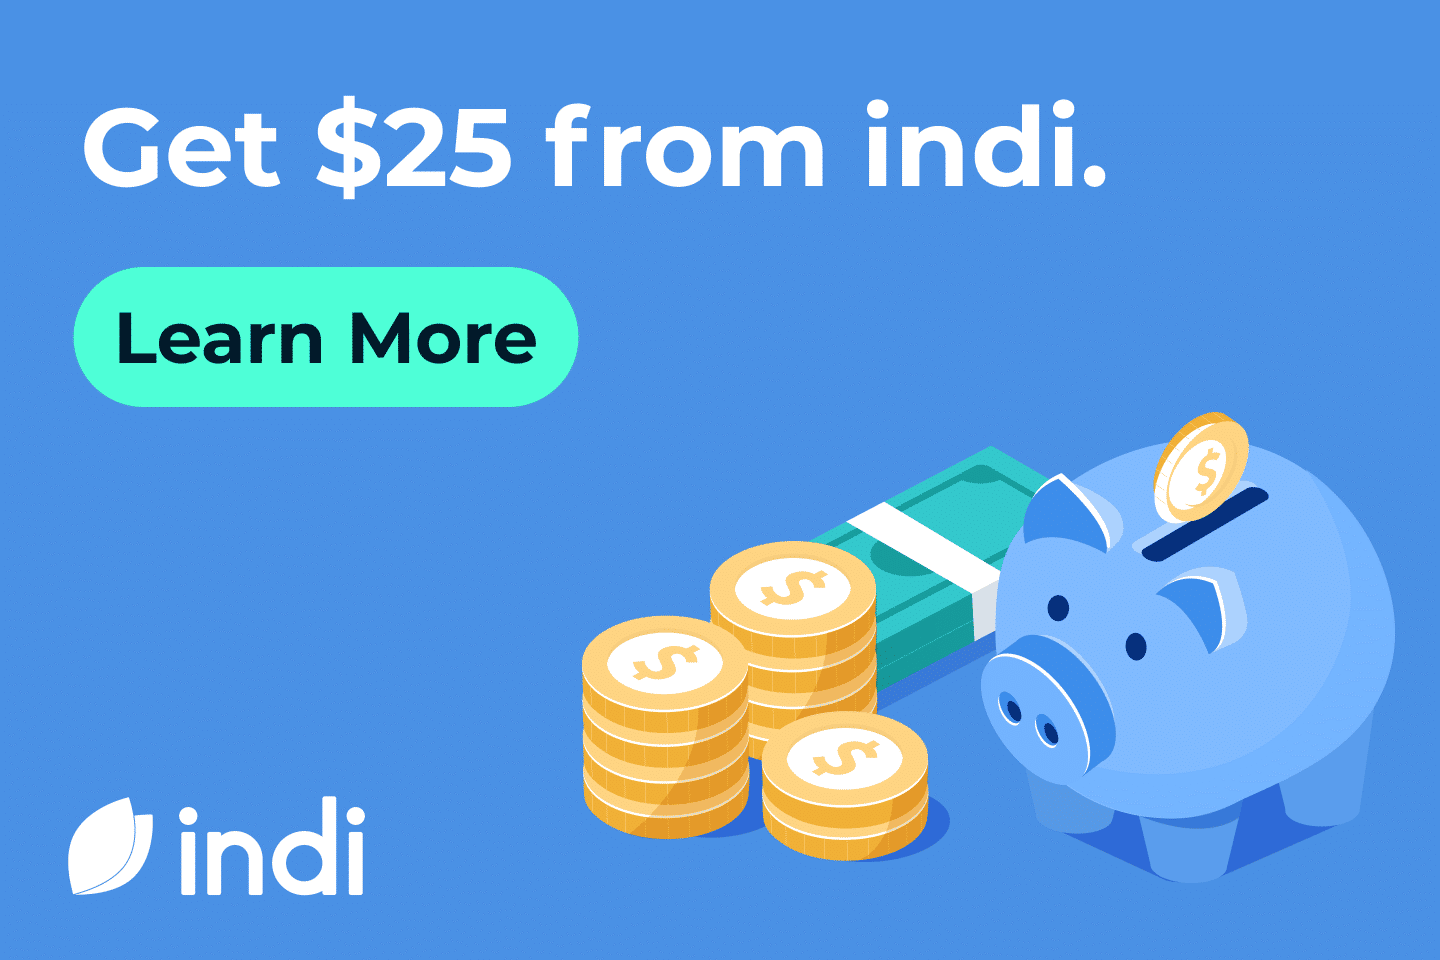 Get $25 from indi